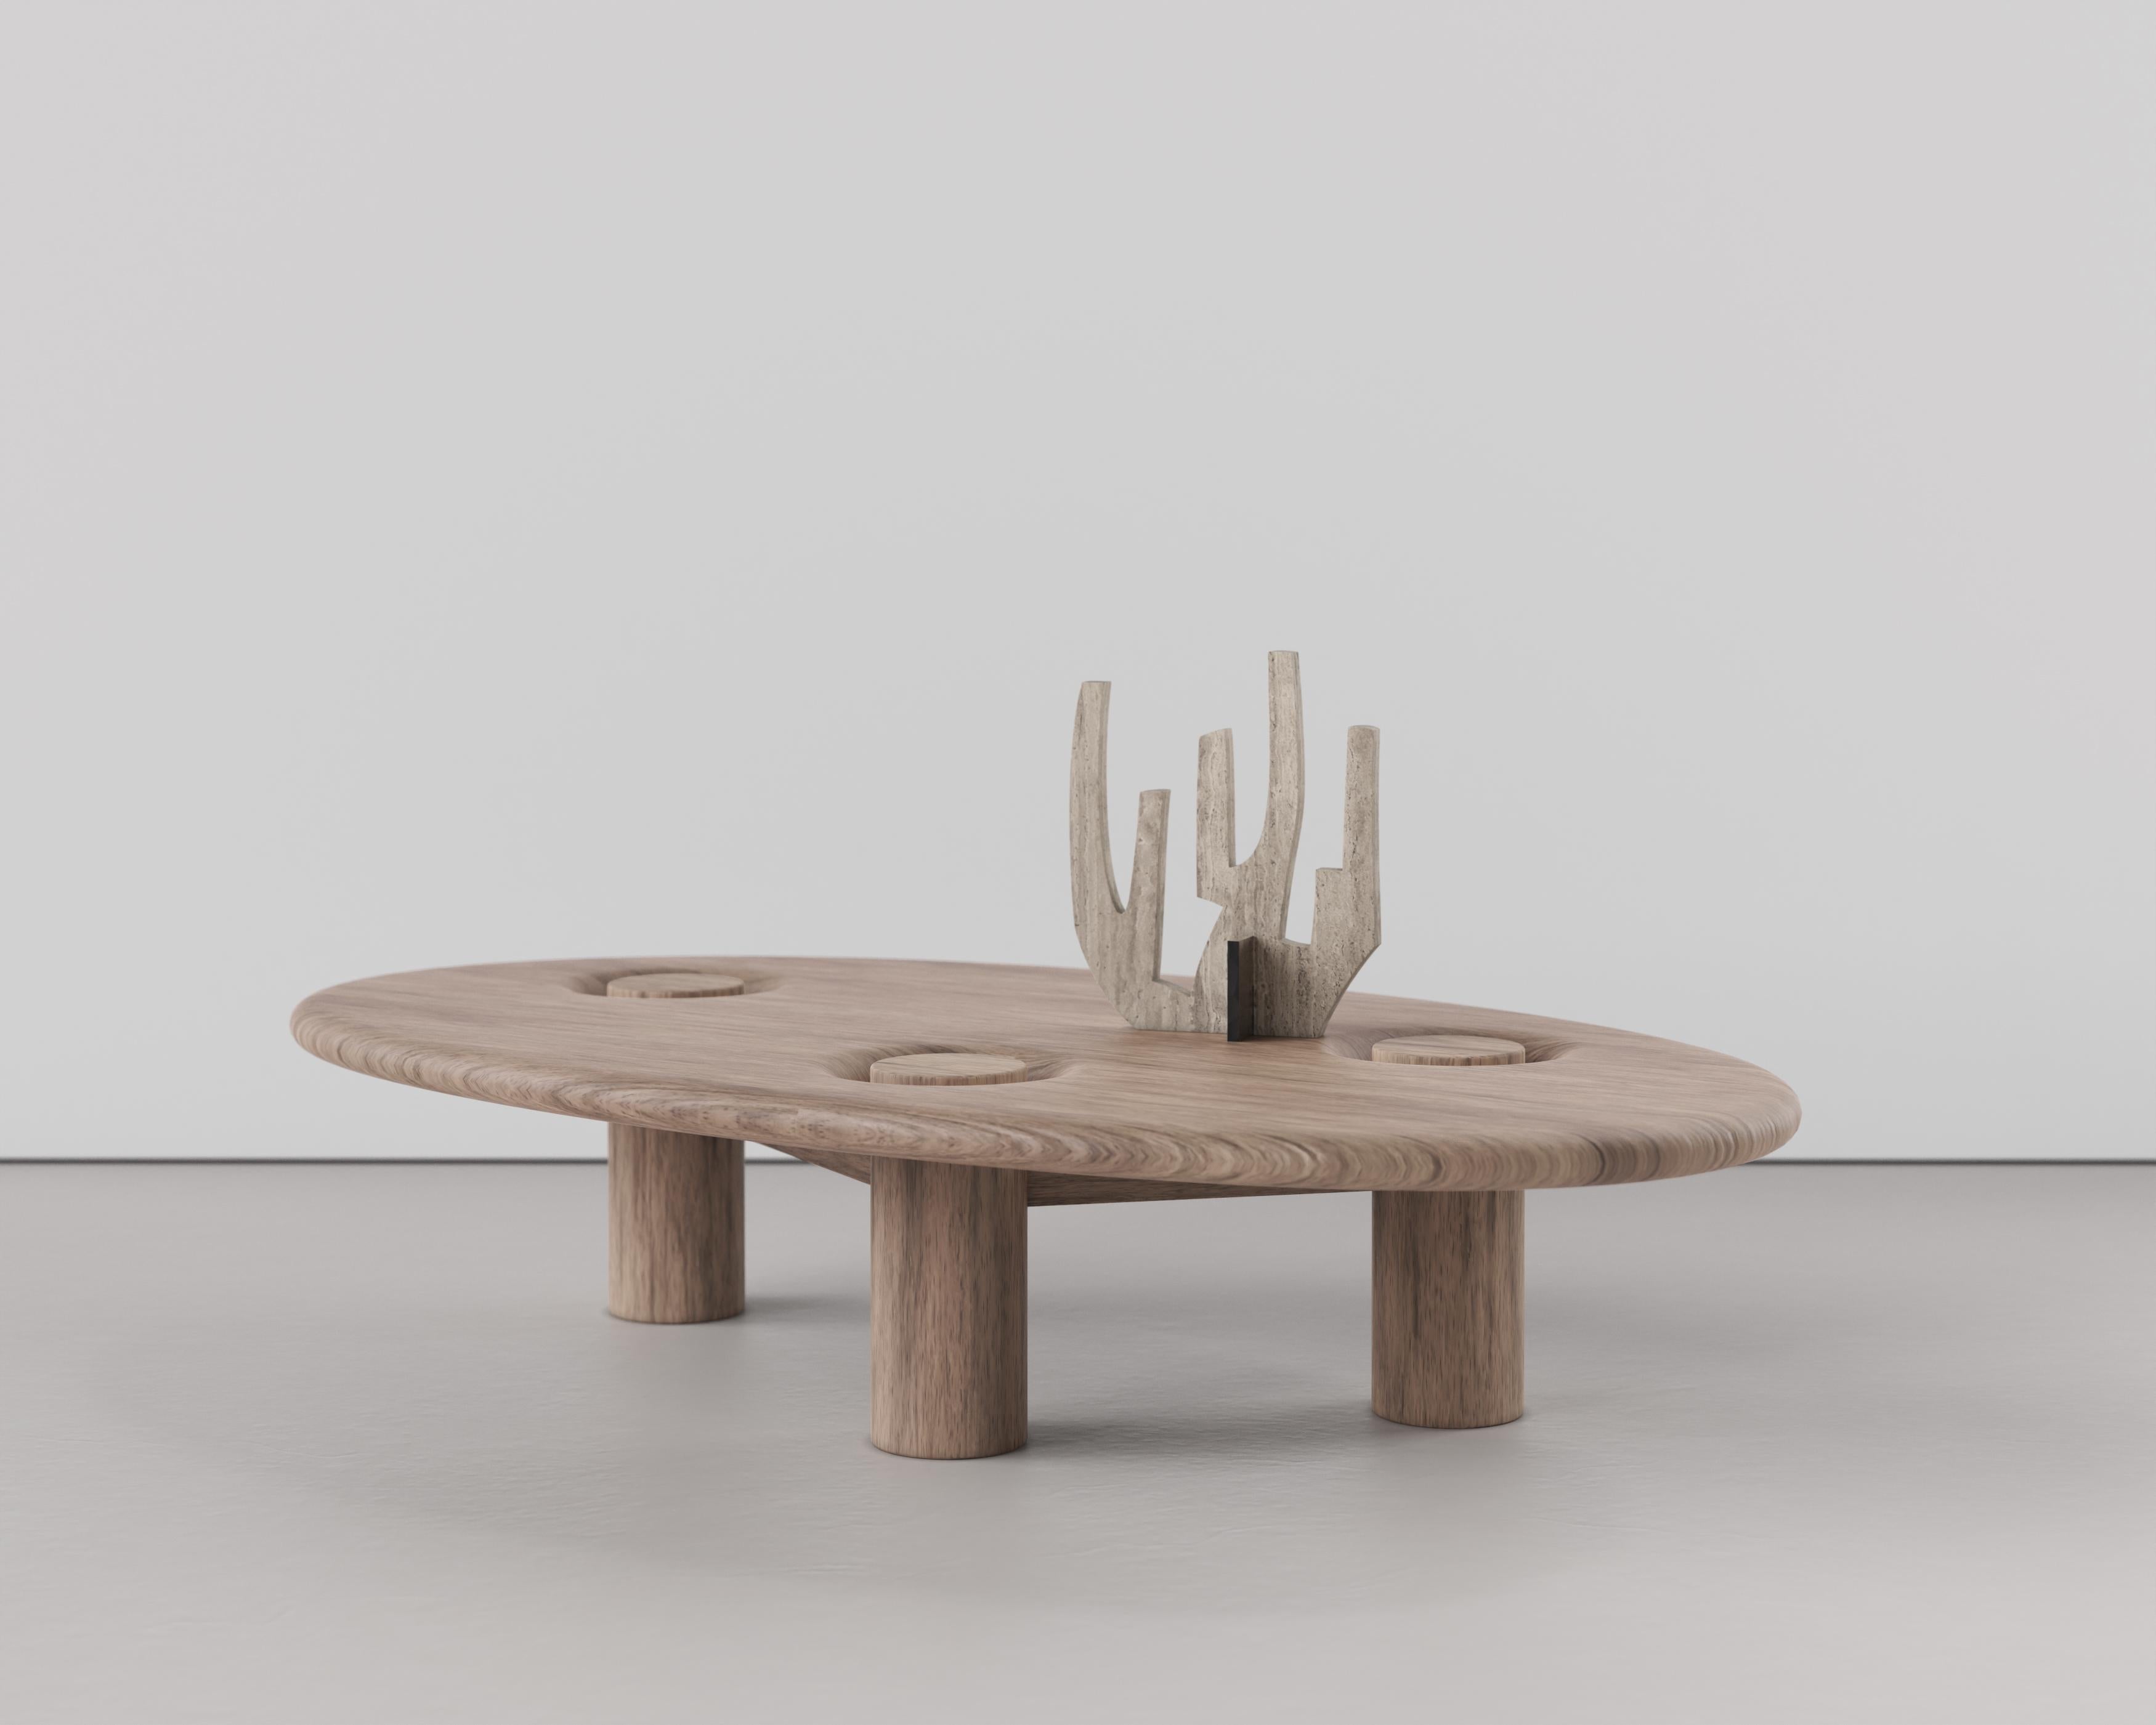 Contemporary LimitedEdition Signed Wood Low Table, Asido V2 by Edizione Limitata For Sale 3